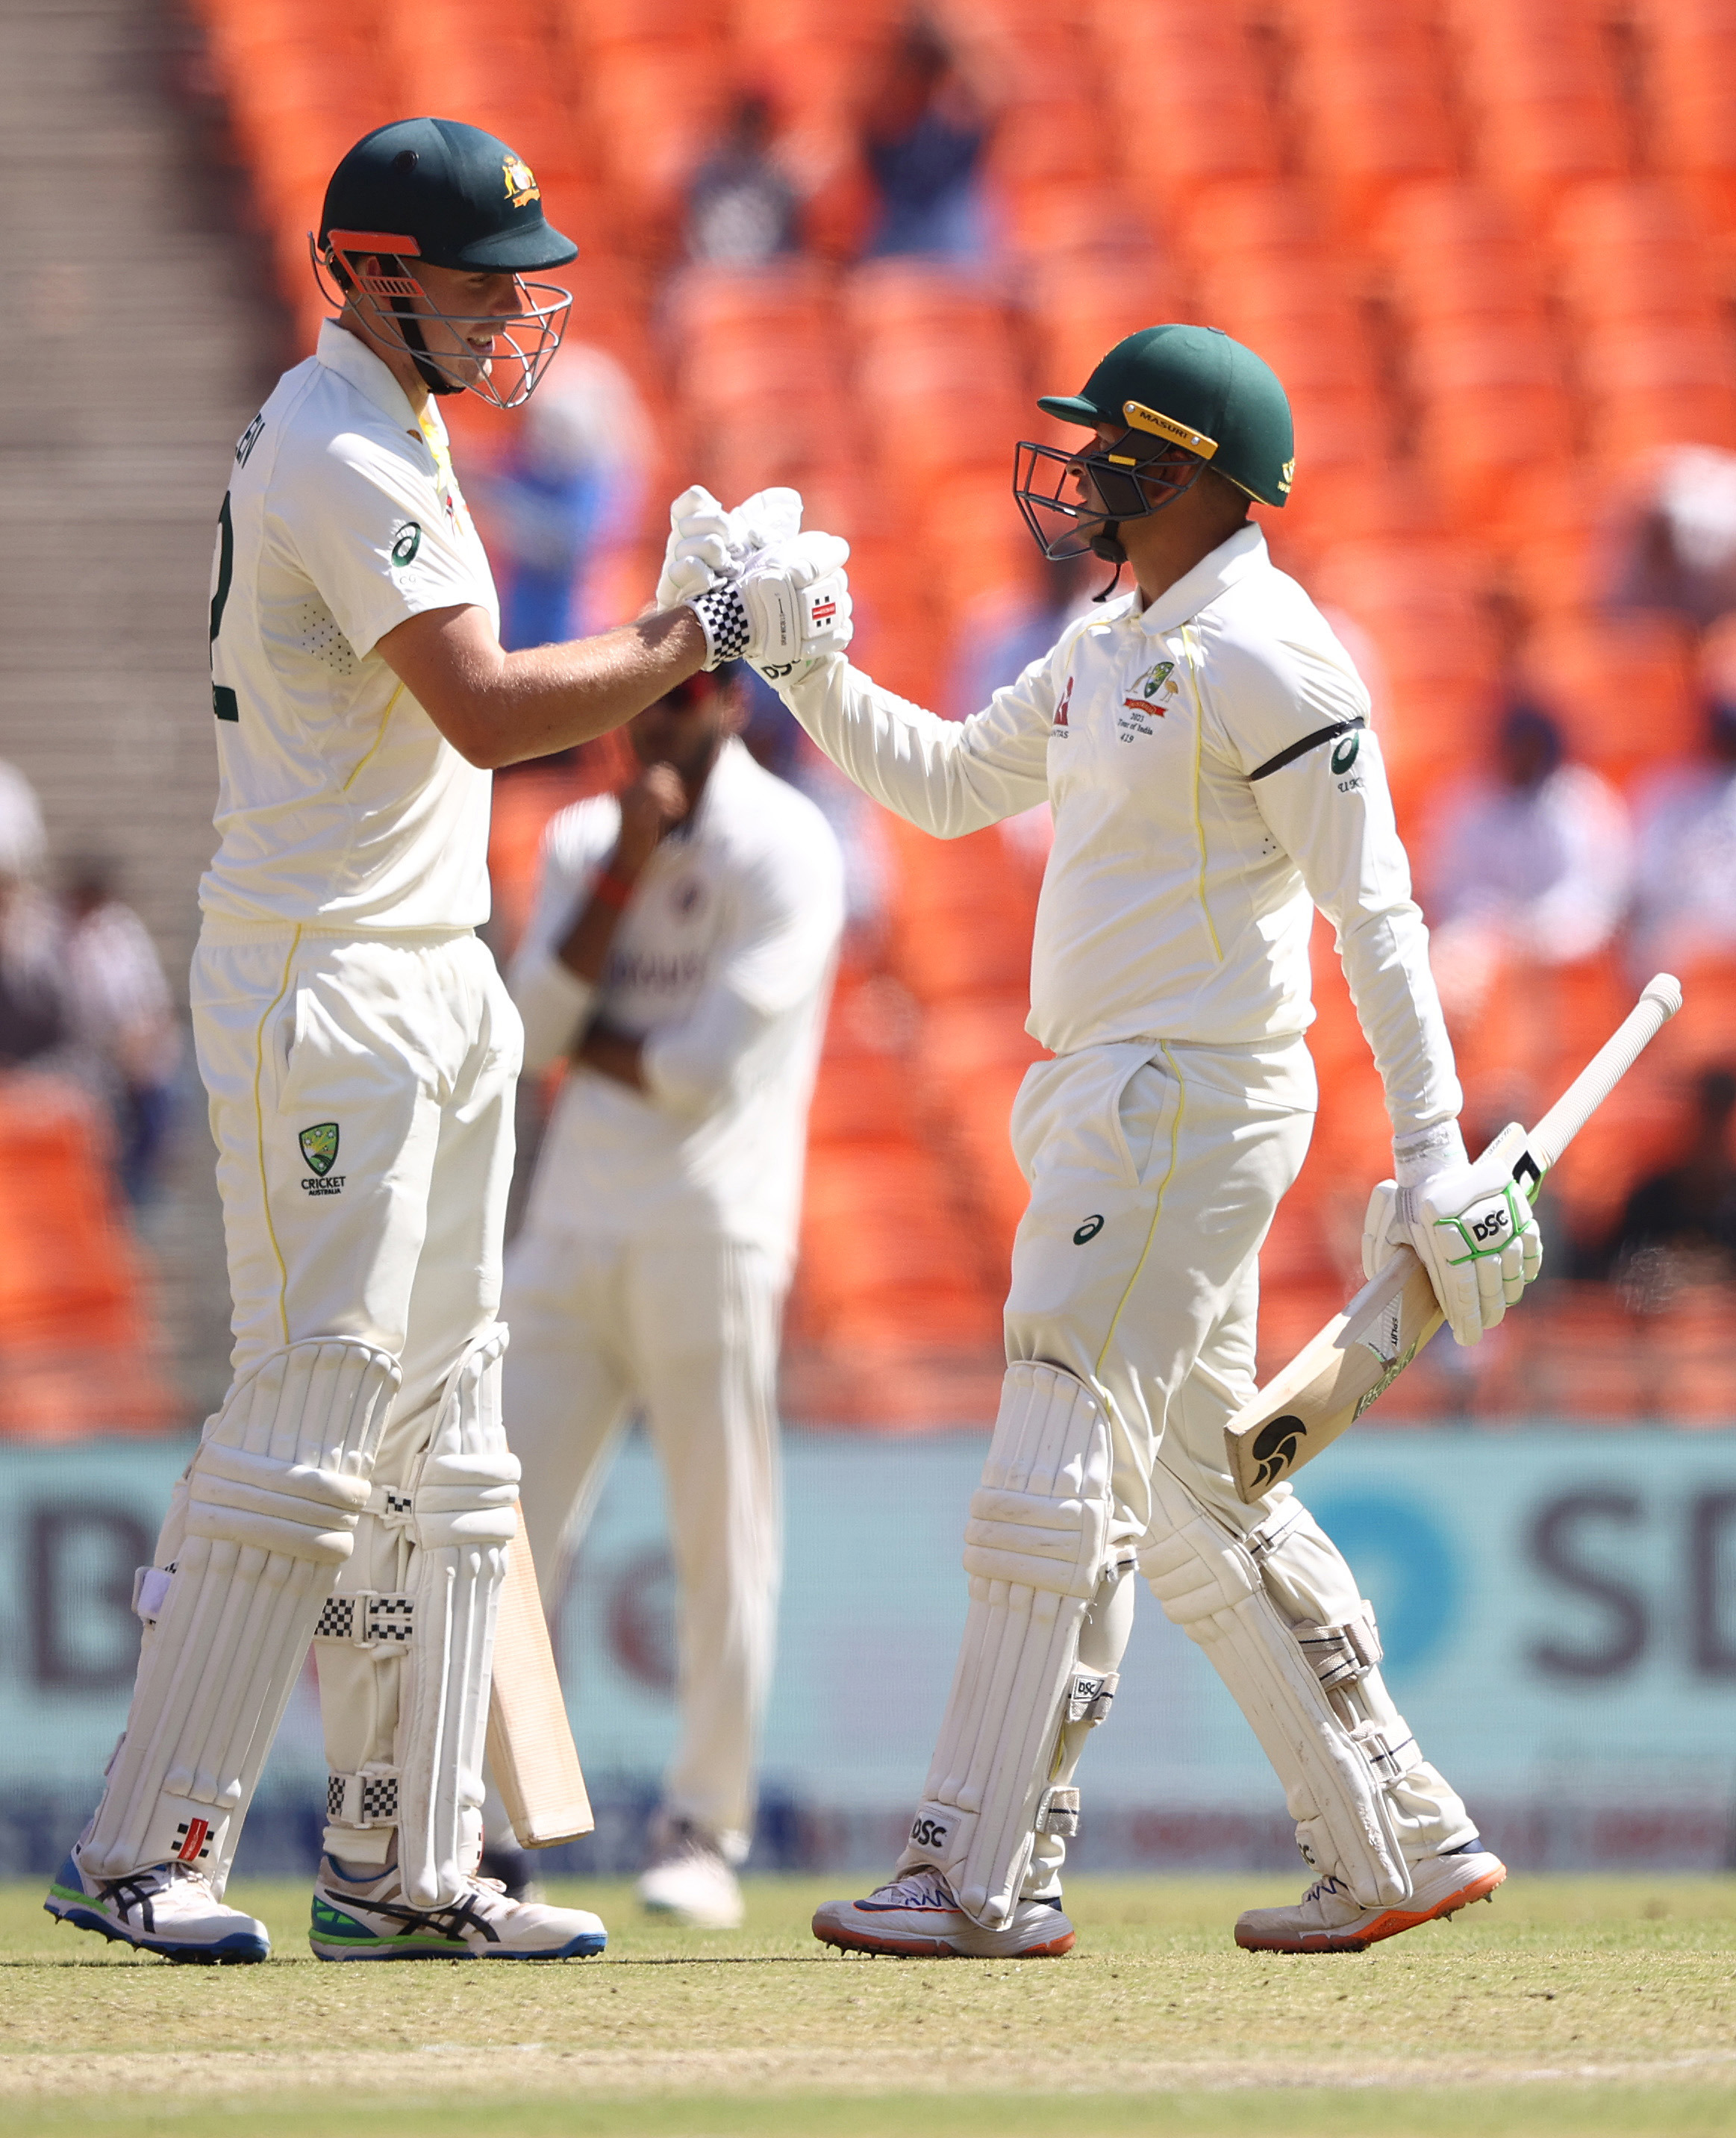 AHMEDABAD, INDIA - MARCH 10: Usman Khawaja of Australia is congratulated by Cameron Green after scoring 150 runs during day two of the Fourth Test match in the series between India and Australia at Narendra Modi Stadium on March 10, 2023 in Ahmedabad, India. (Photo by Robert Cianflone/Getty Images)